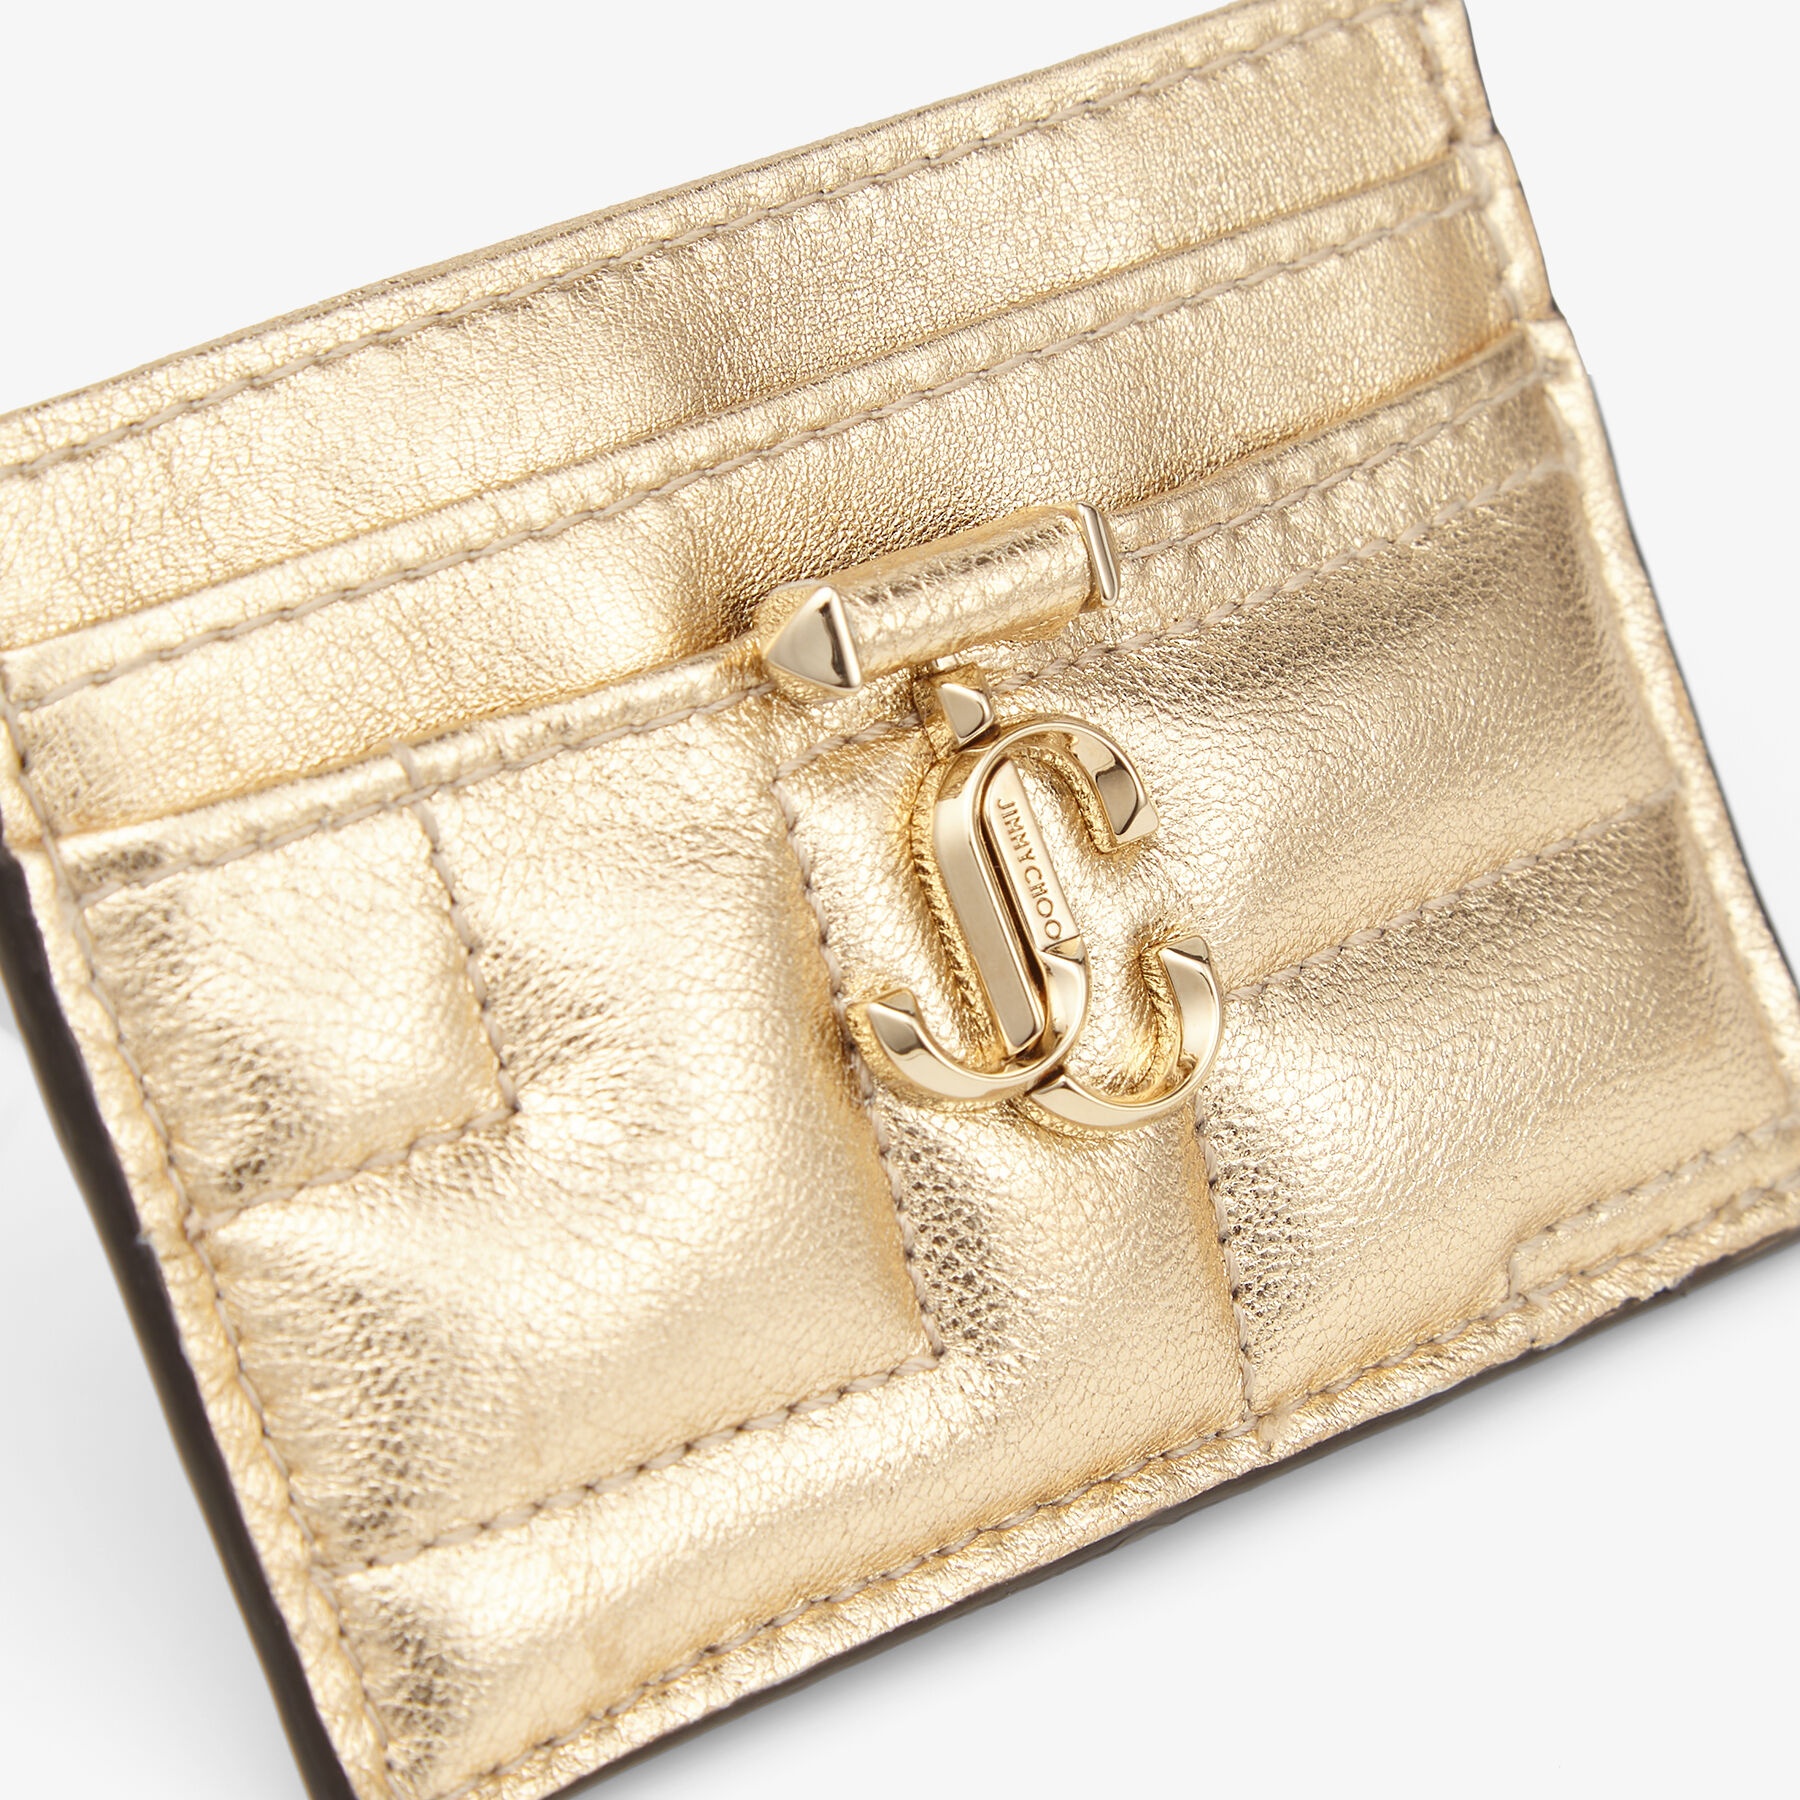 Gold Avenue Metallic Nappa Leather Clutch Bag with Light Gold JC